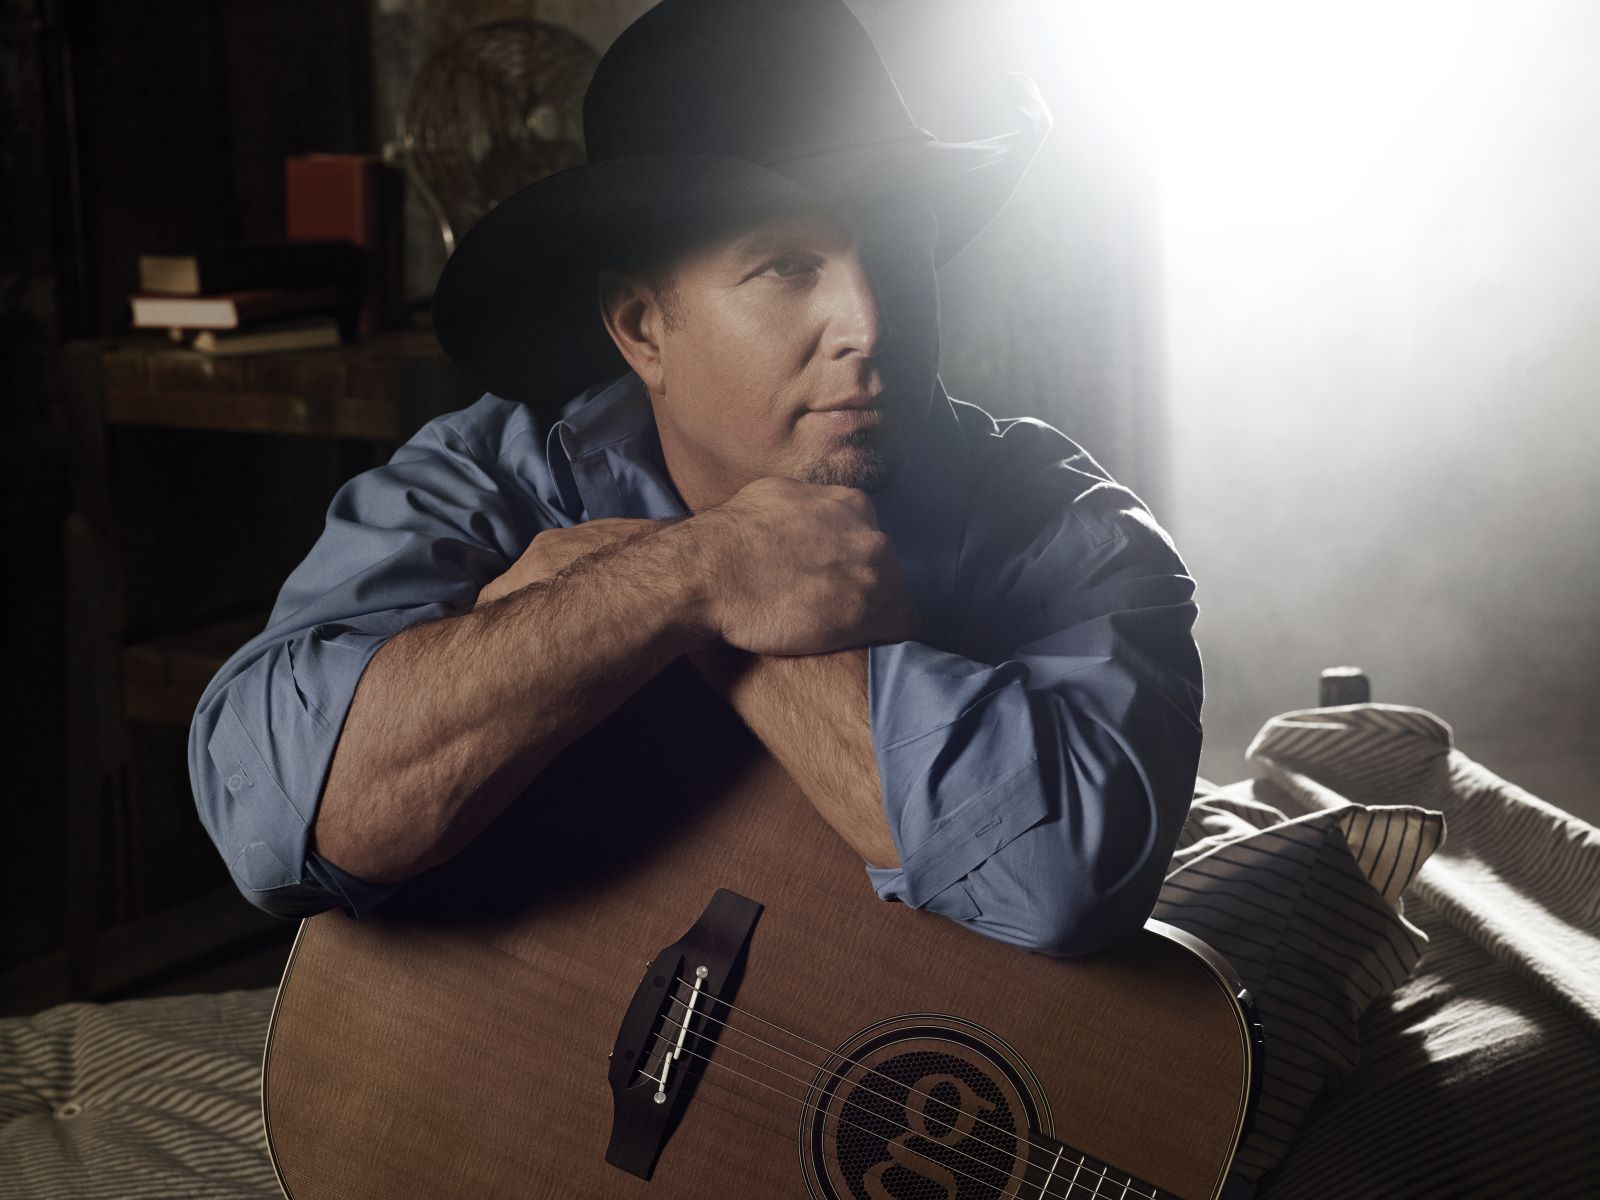 photograph of musician Garth Brooks in blue shirt with guitar